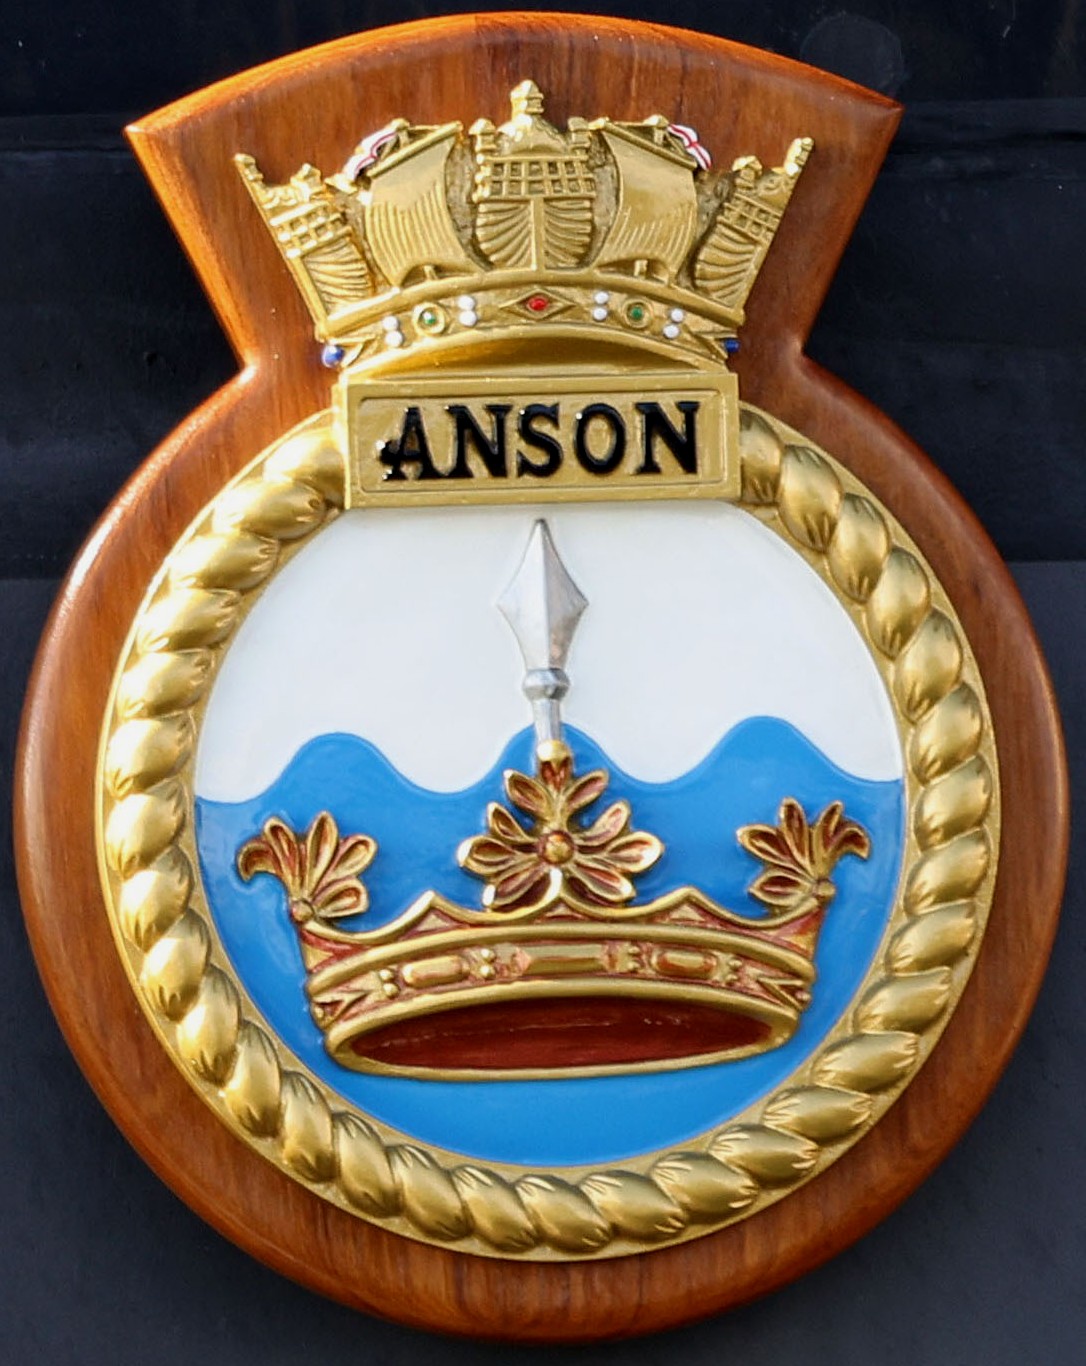 s123 hms anson insignia crest patch badge astute class attack submarine ssn royal navy 05c